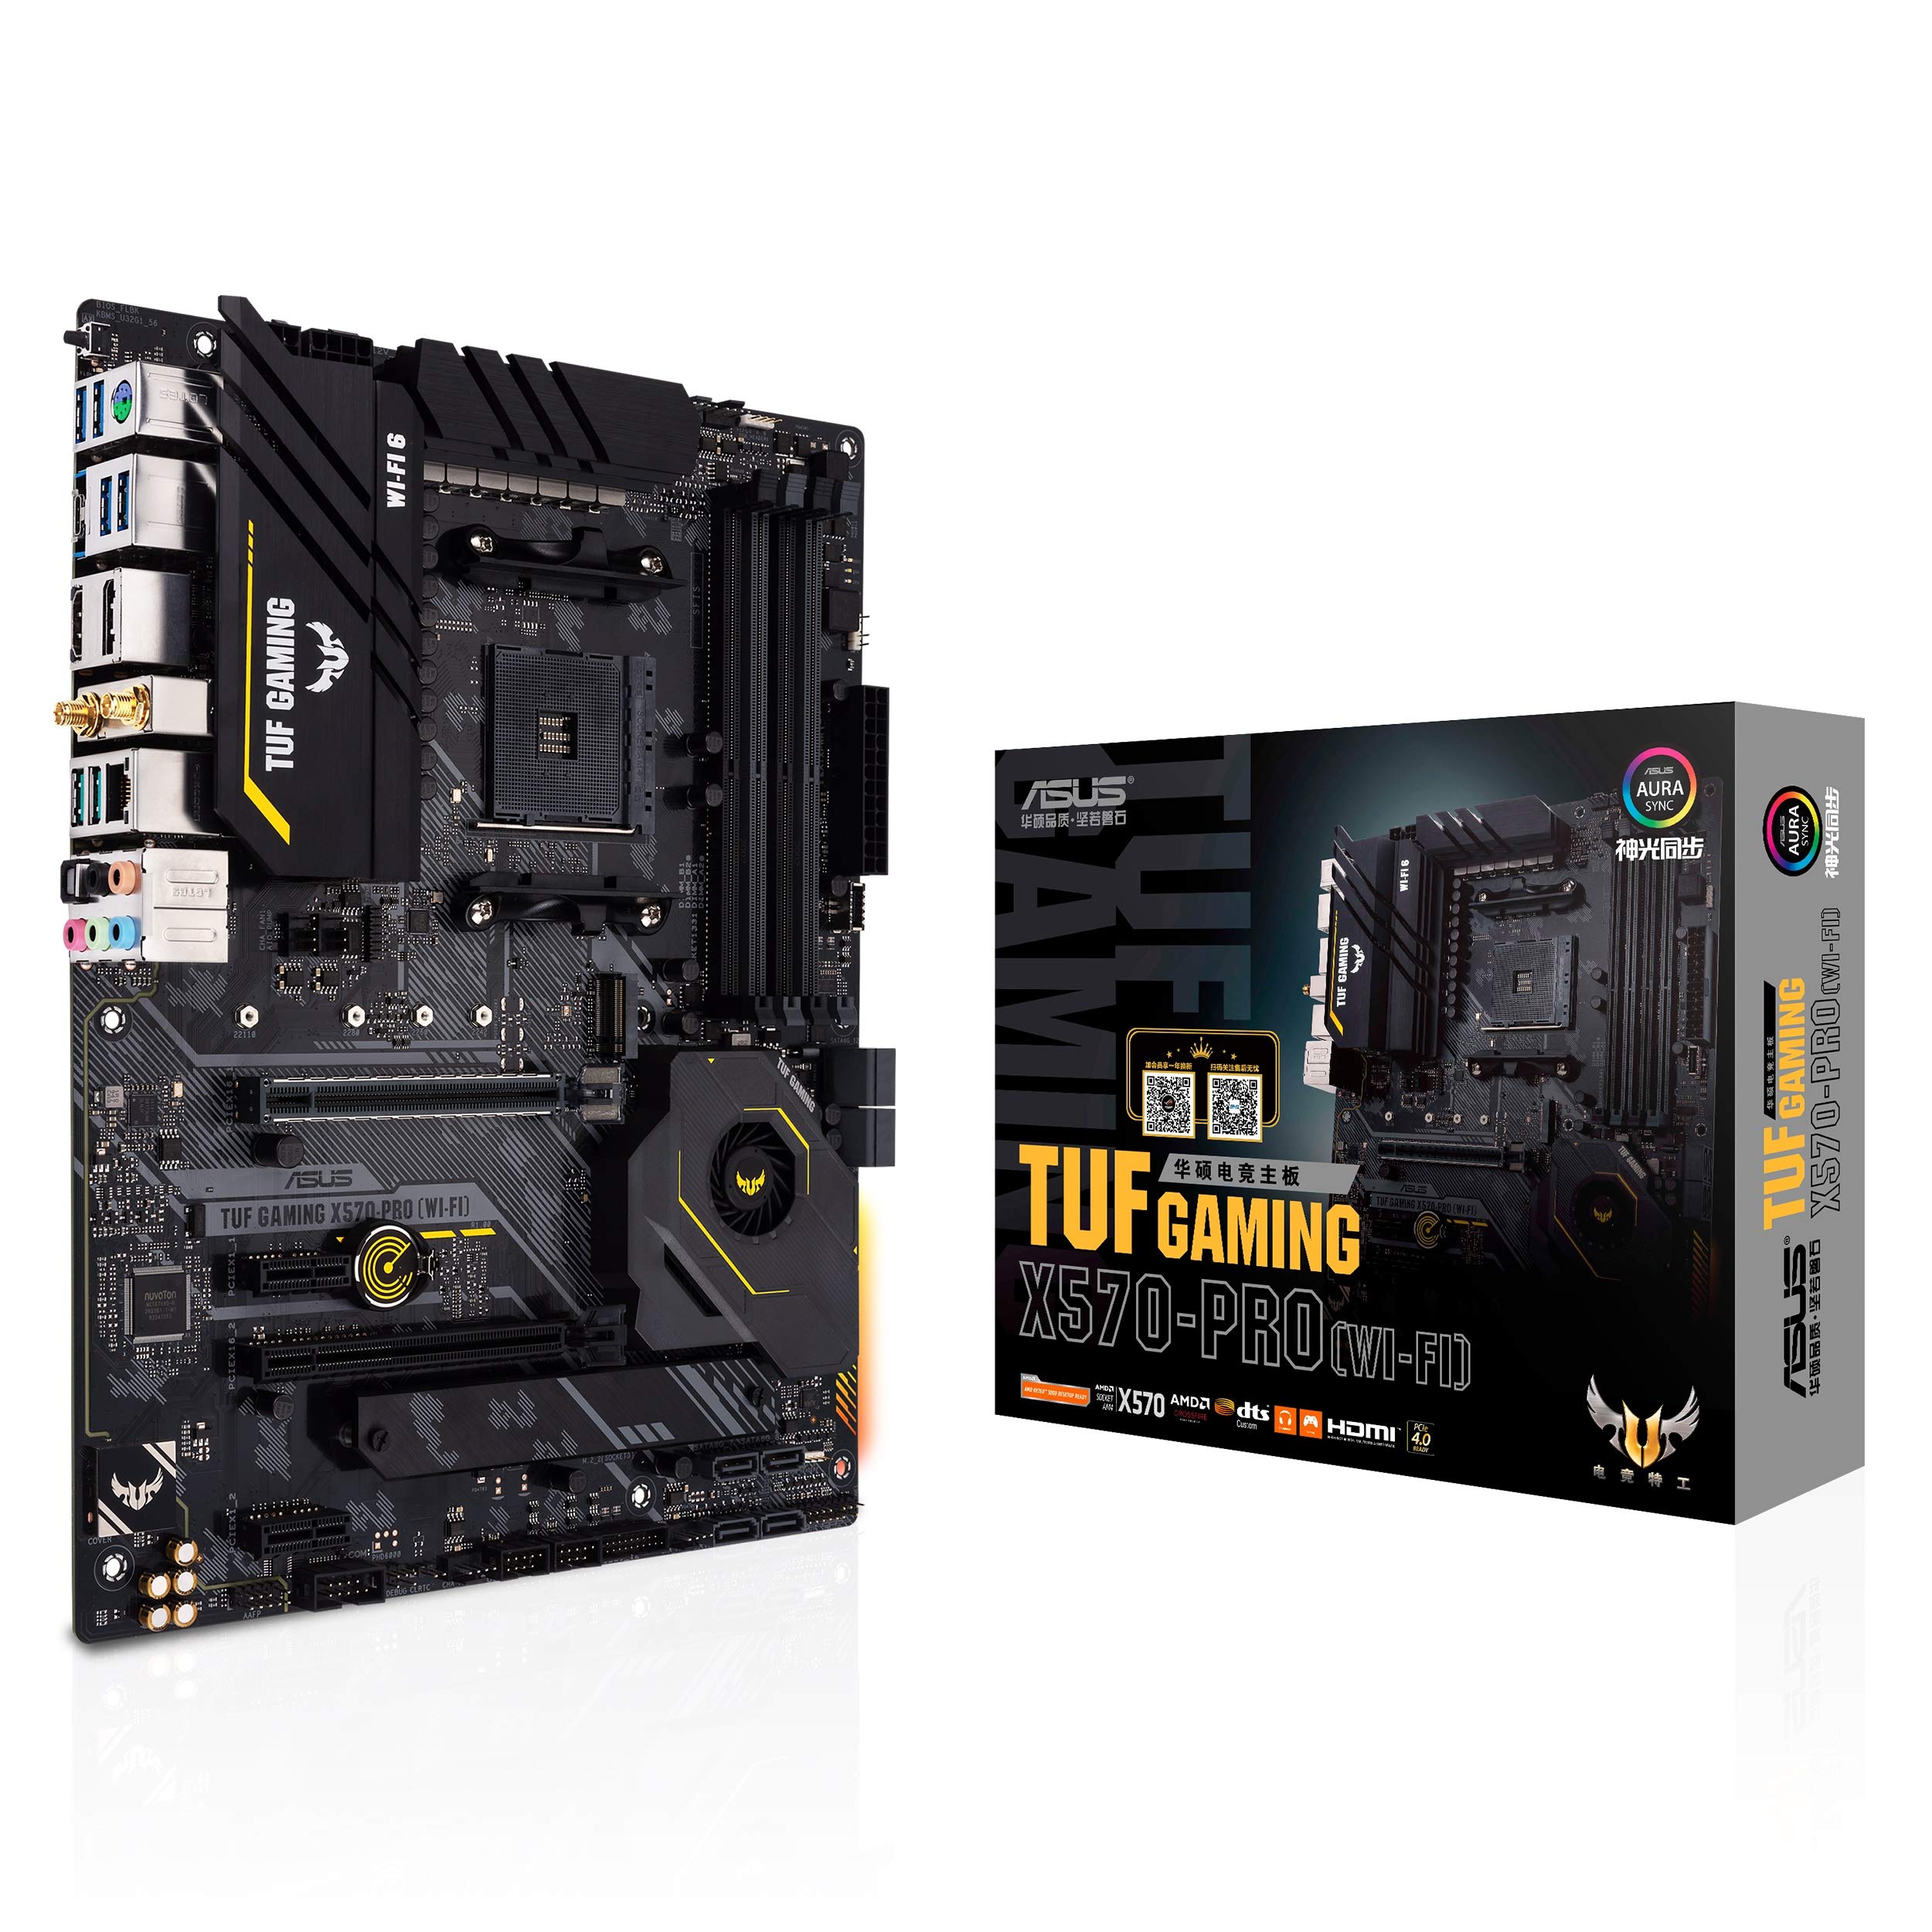 ASUS TUF Gaming X570-PRO AMD AM4 X570 ATX Gaming Motherboard with PCIe 4.0, dual M.2, 2.5G Intel LAN, Wi-Fi 6, 14 Dr. MOS power stages, USB 3.2 Gen 2 Type-C ports and Aura Sync RGB lighting